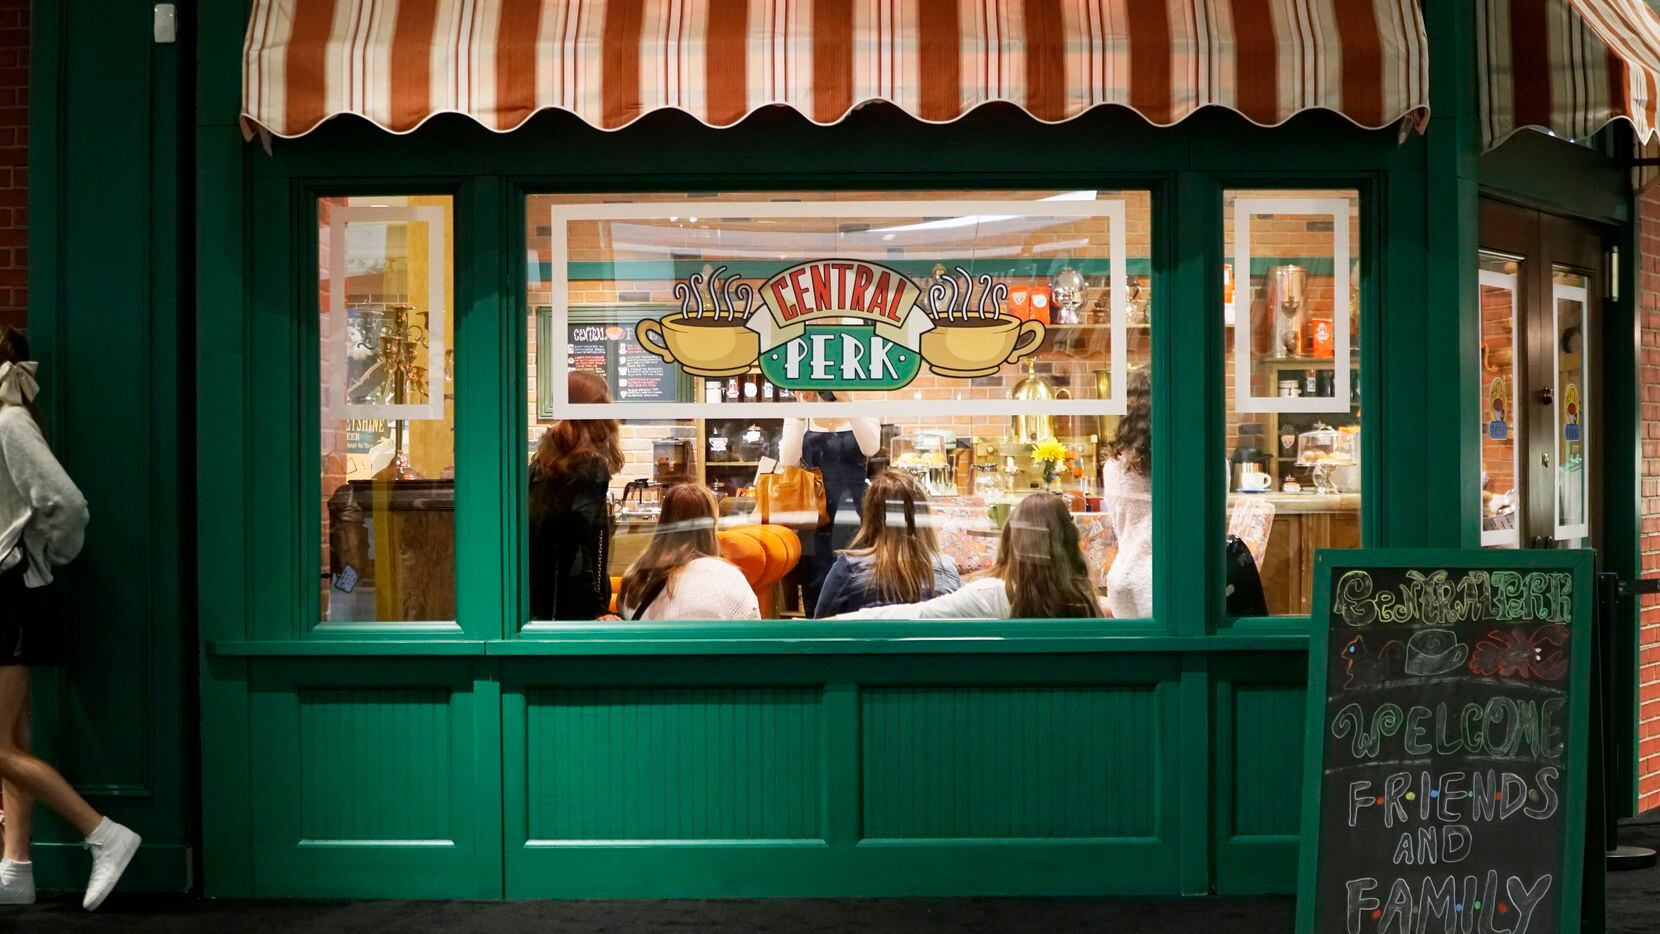 See 12 sets from the TV show "Friends" recreated for The Friends Experience at the Shops at...